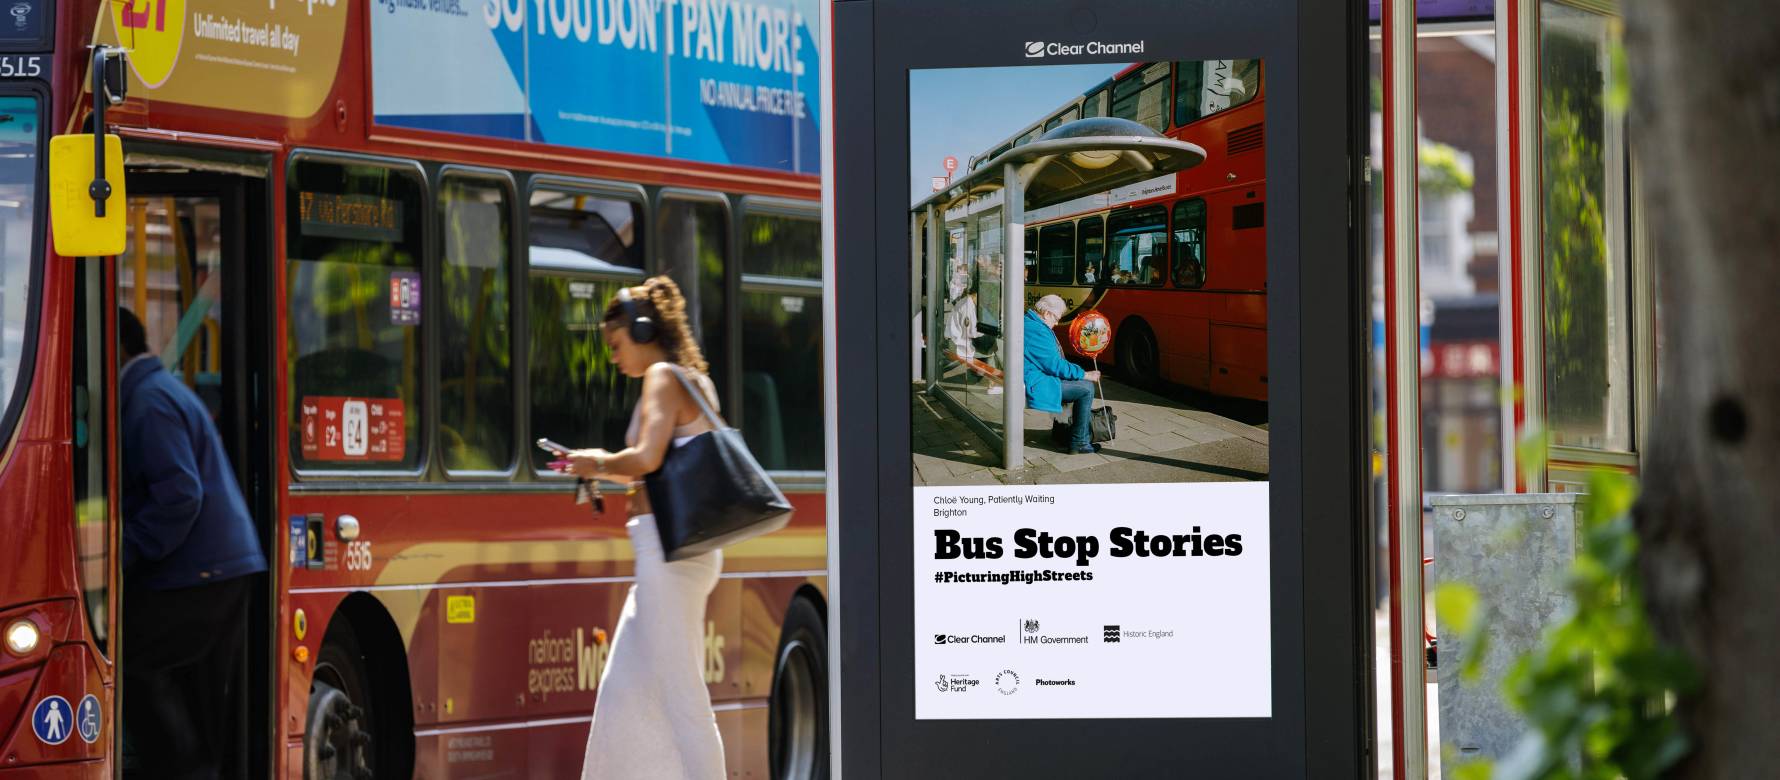 Clear Channel Bus Stop Stories campaign on Adshel Live screen showing an elderly lady sitting at a bus stop.